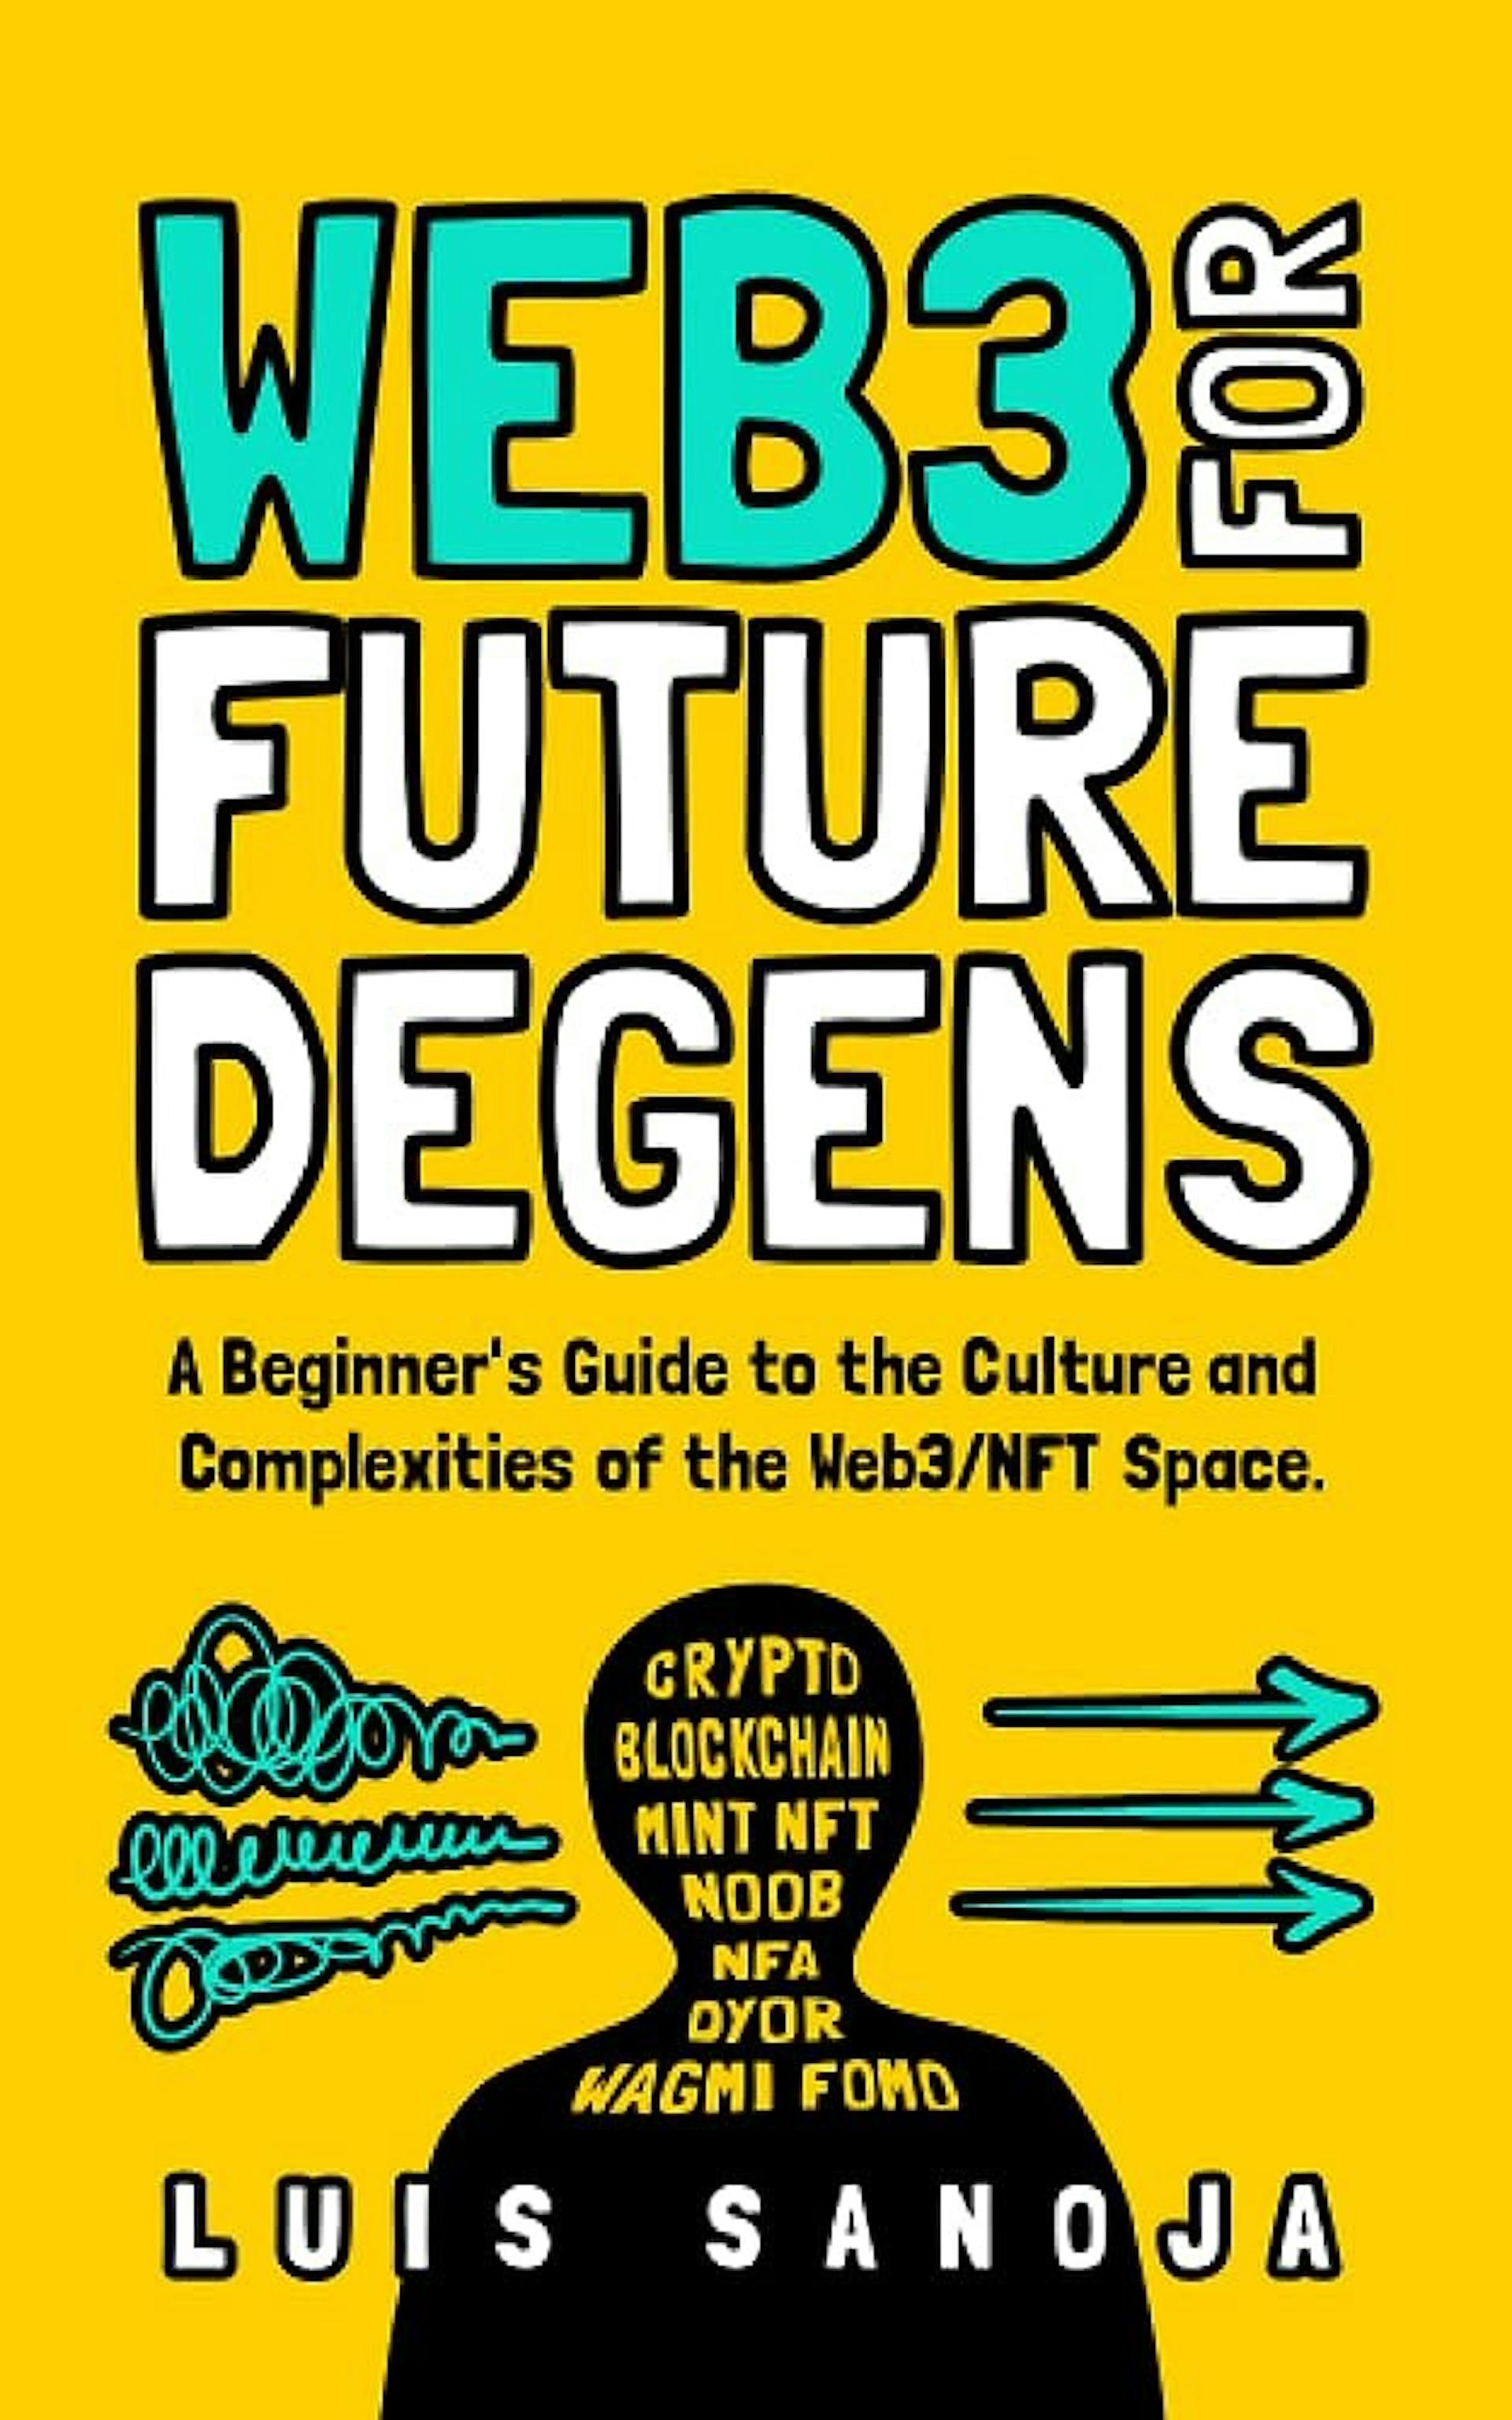 WEB3 FOR FUTURE DEGENS: A Beginner's Guide to the Culture and Complexities of the Web3/NFT Space. Paperback – February 22, 2023